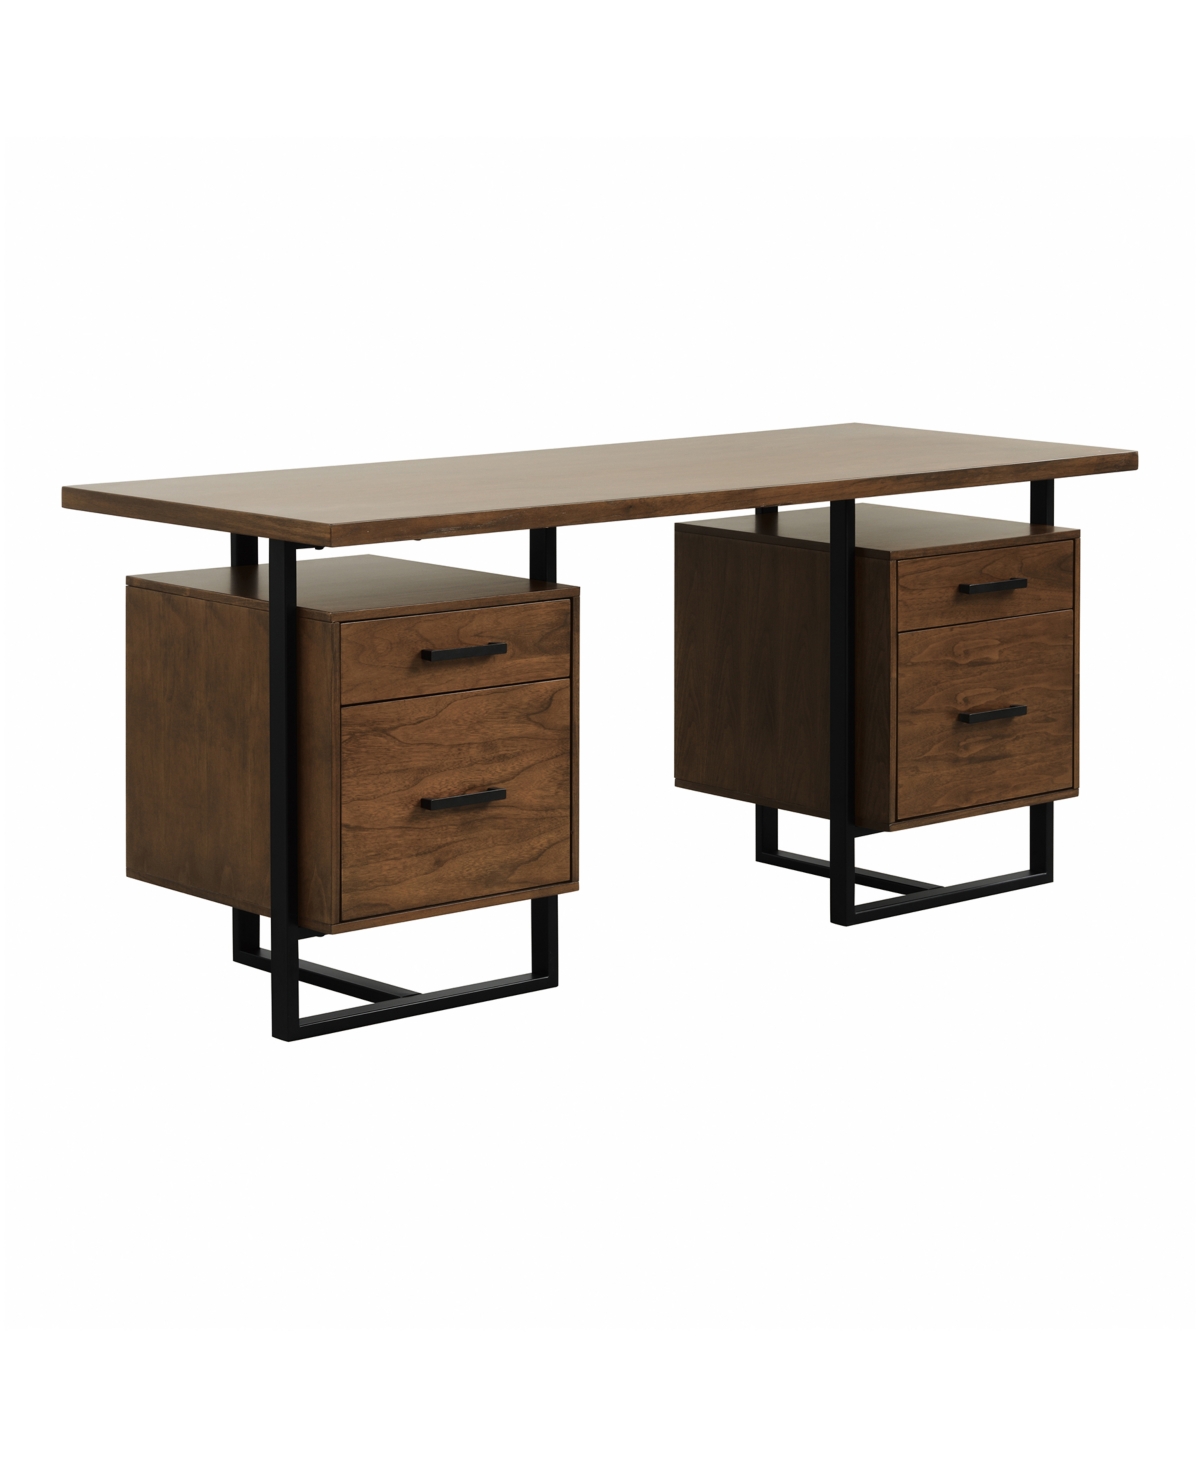 Furniture Helena Desk With 2 Cabinets In -tone Finish- Walnut And Rustic Black Me